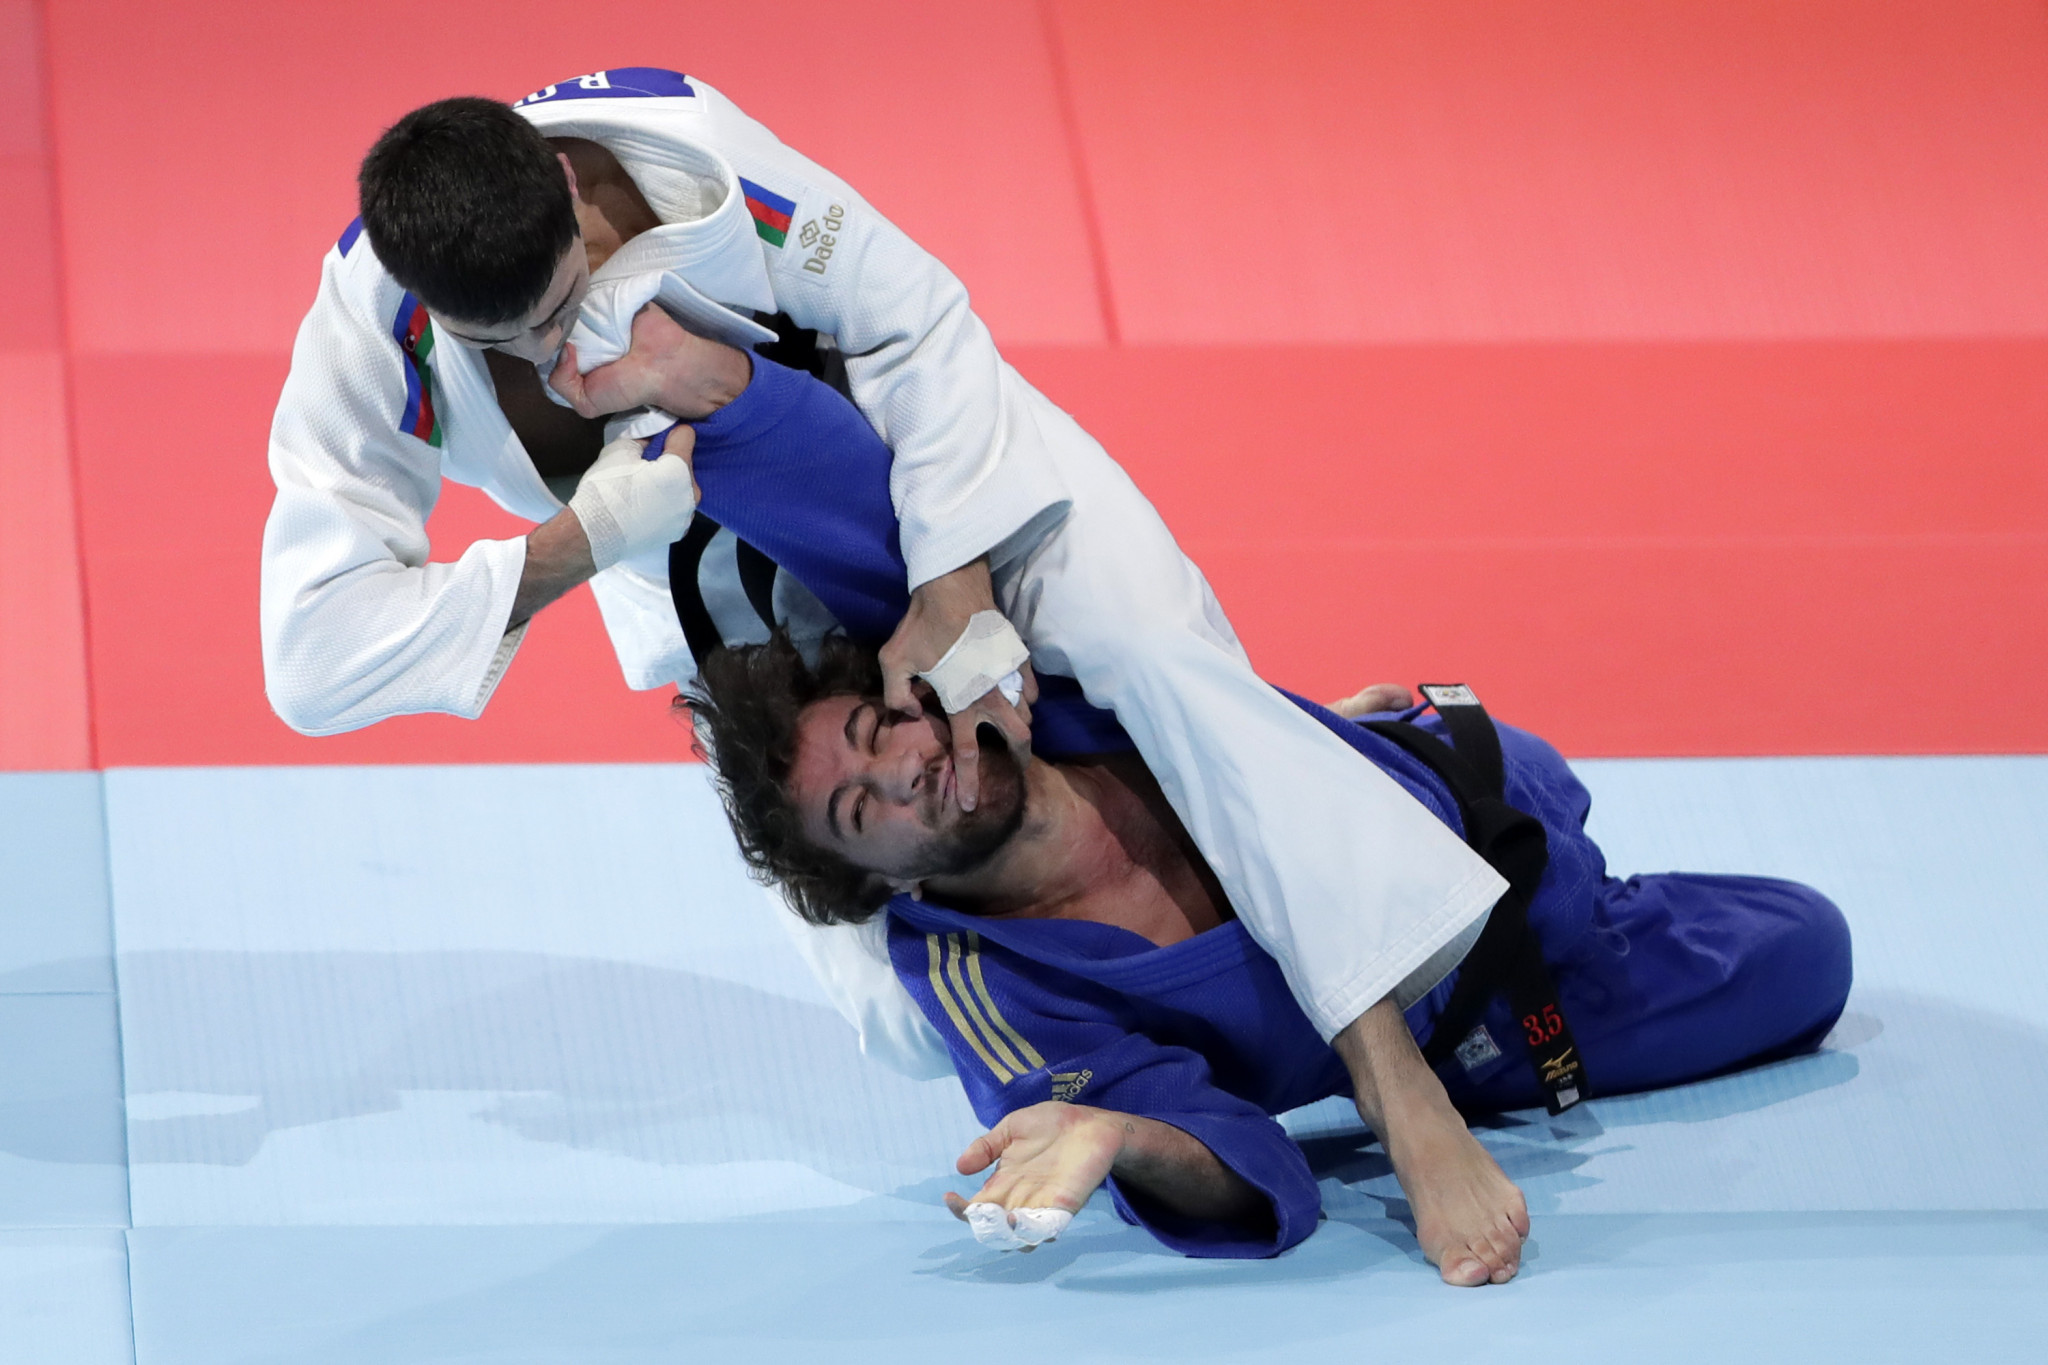 Rustam Orujov, in white, and Hidayet Heydarov could meet in the men's under-73kg final at the Baku Grand Slam ©Getty Images